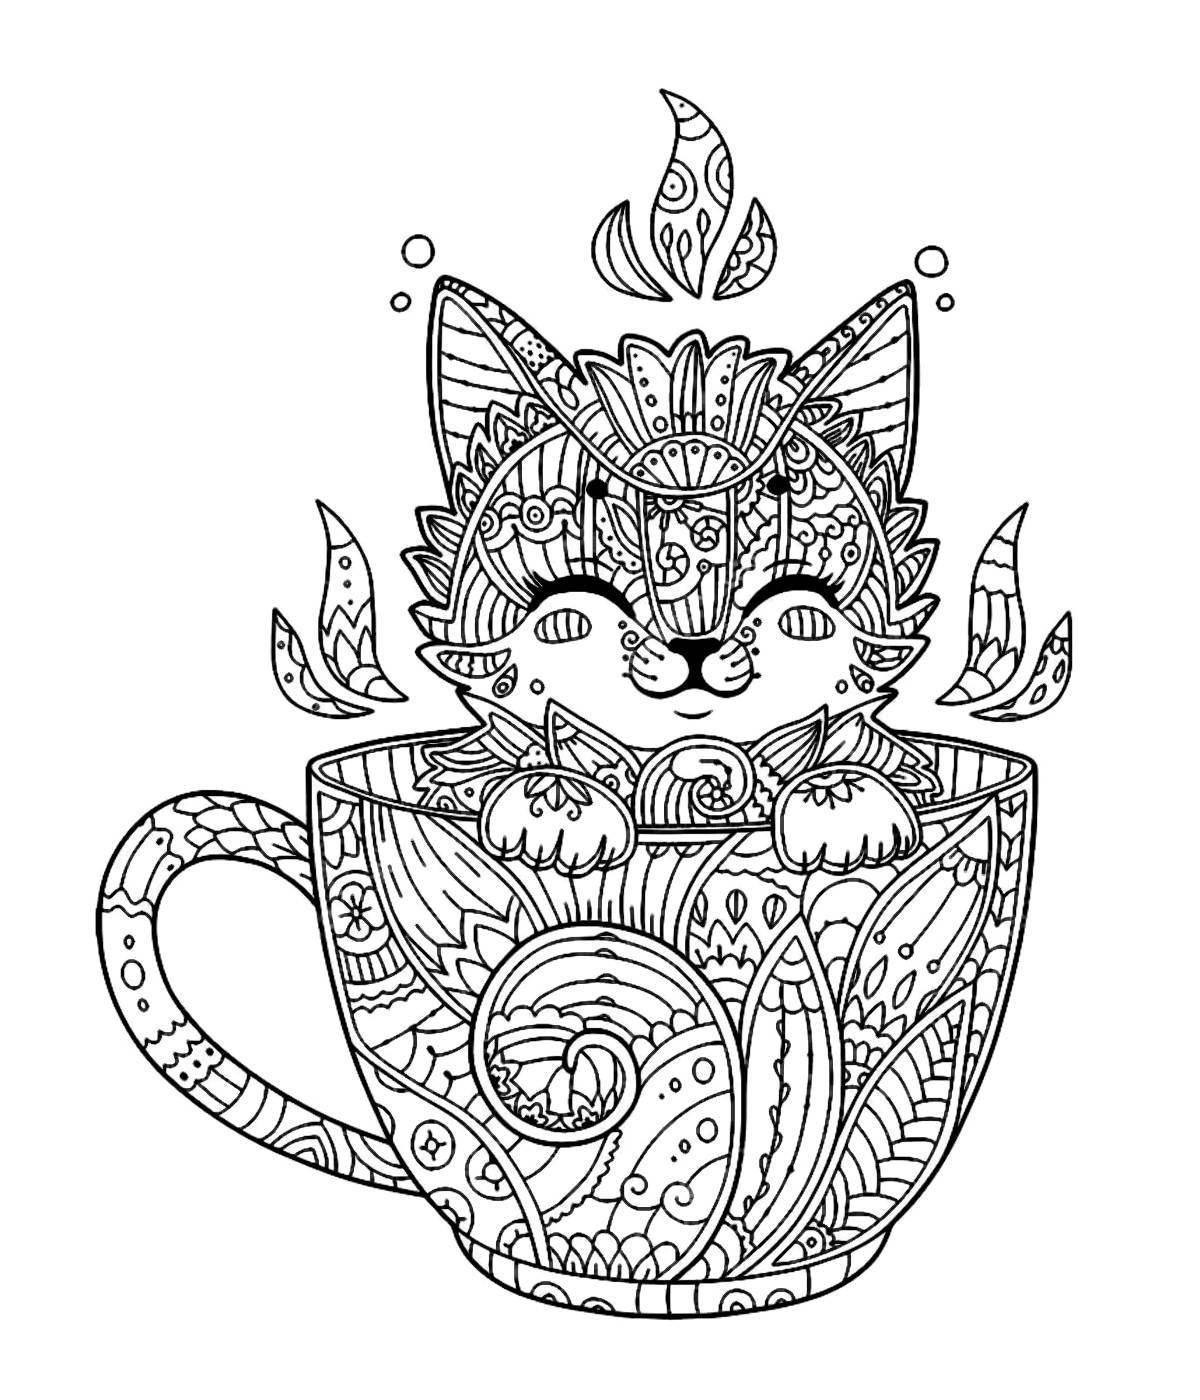 Coloring page playful cat in a cup